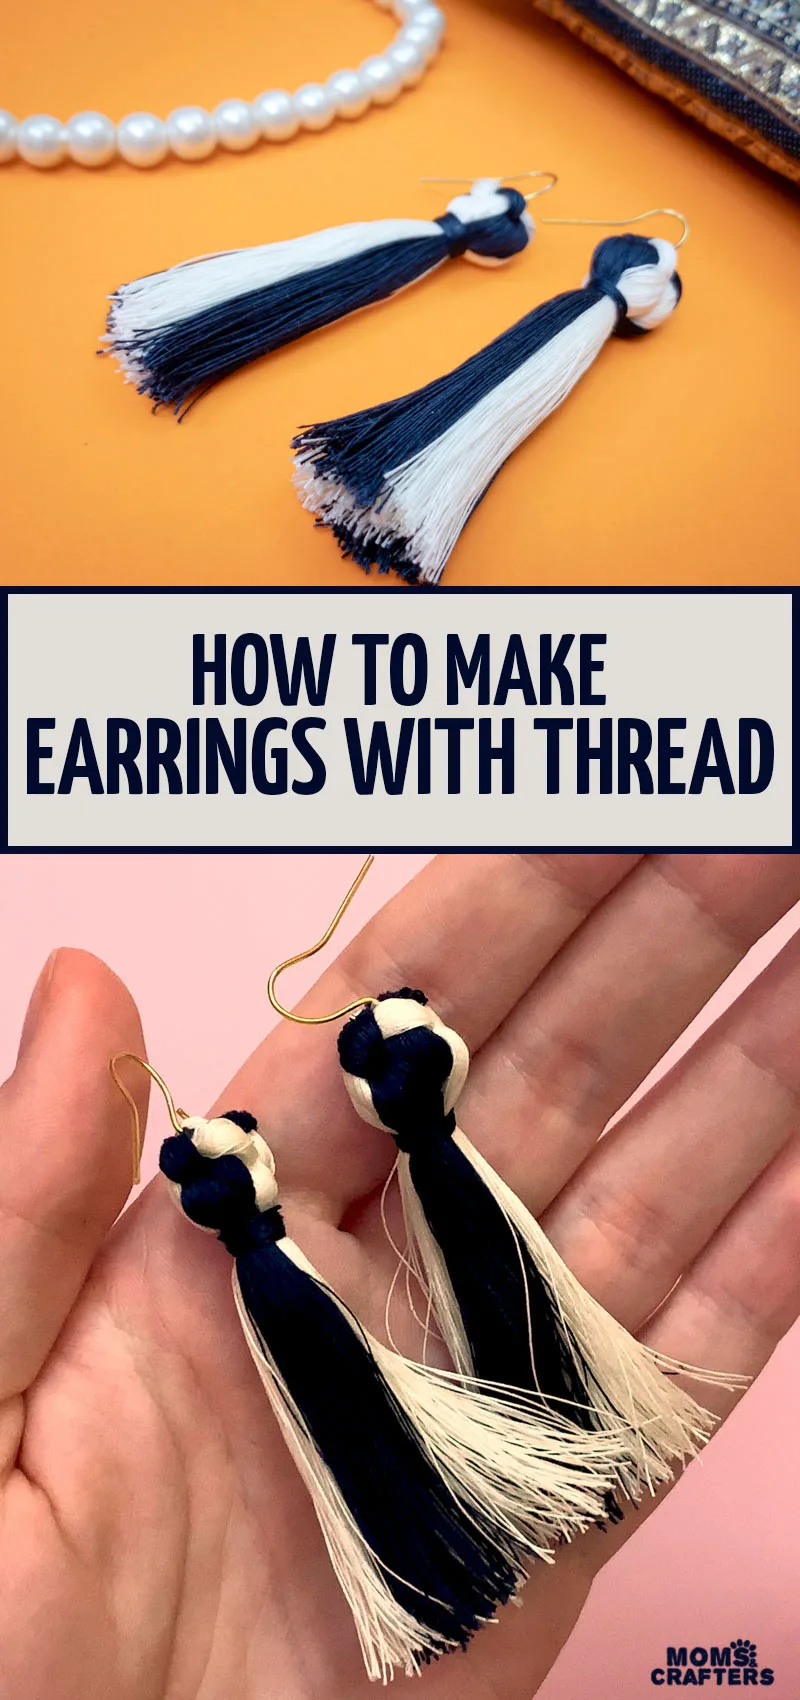 Learn how to make chic tassel earrings with thread, a cool DIY earrings tutorial for beginners